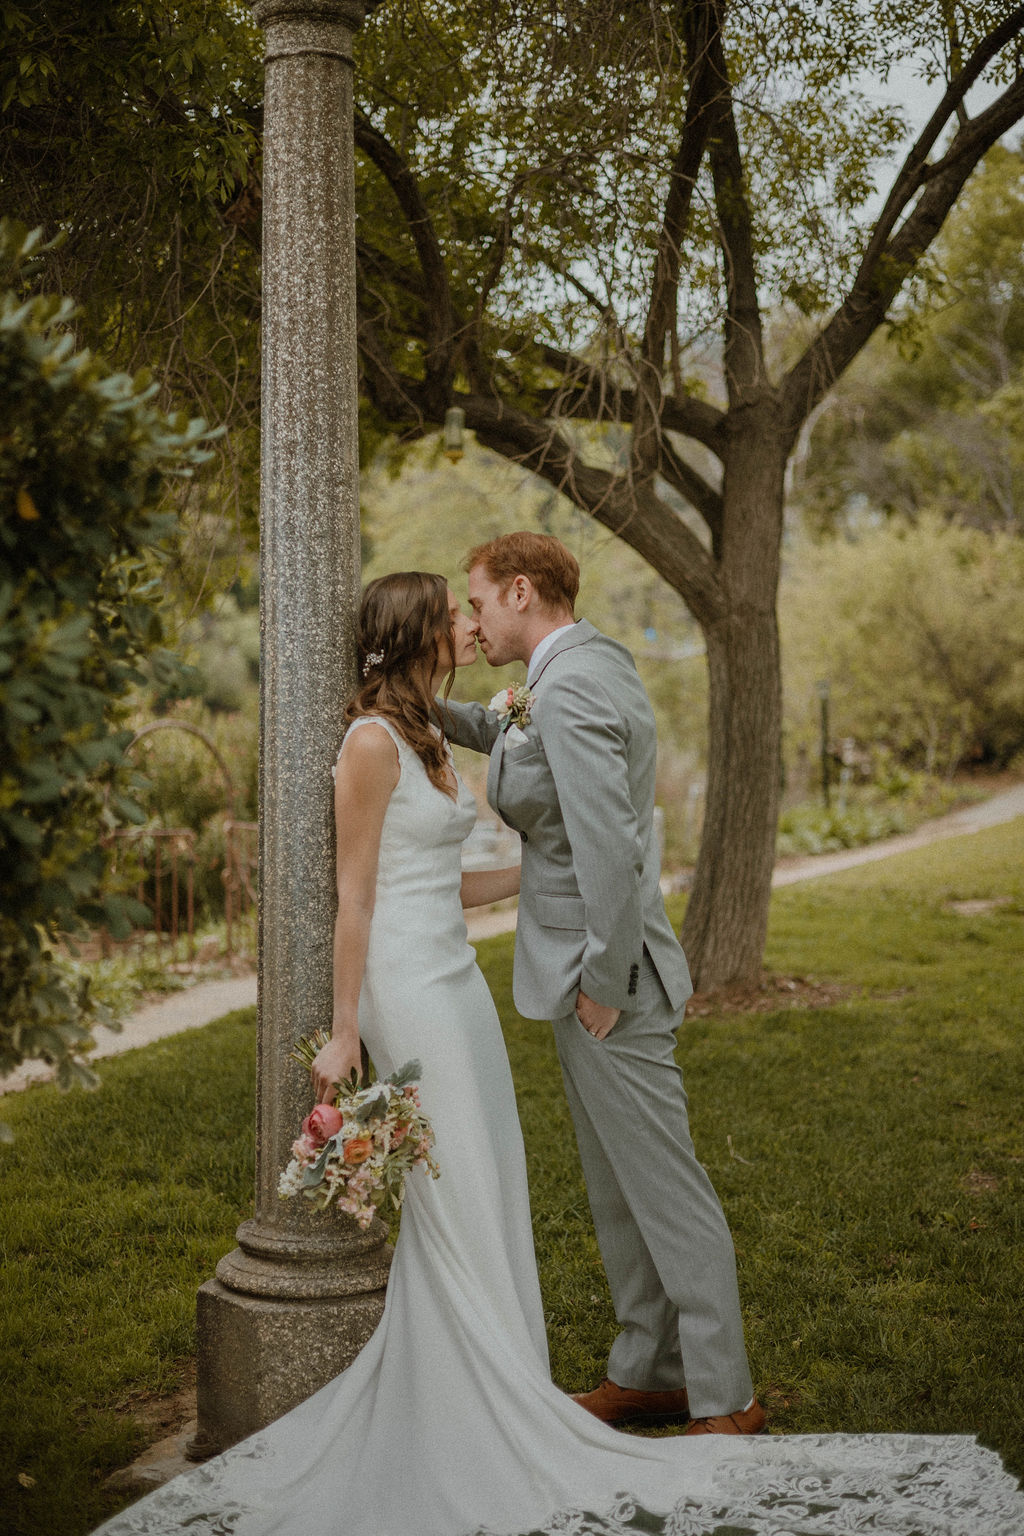 the groom leaning in for a kiss by the lamp post at the California wedding venue